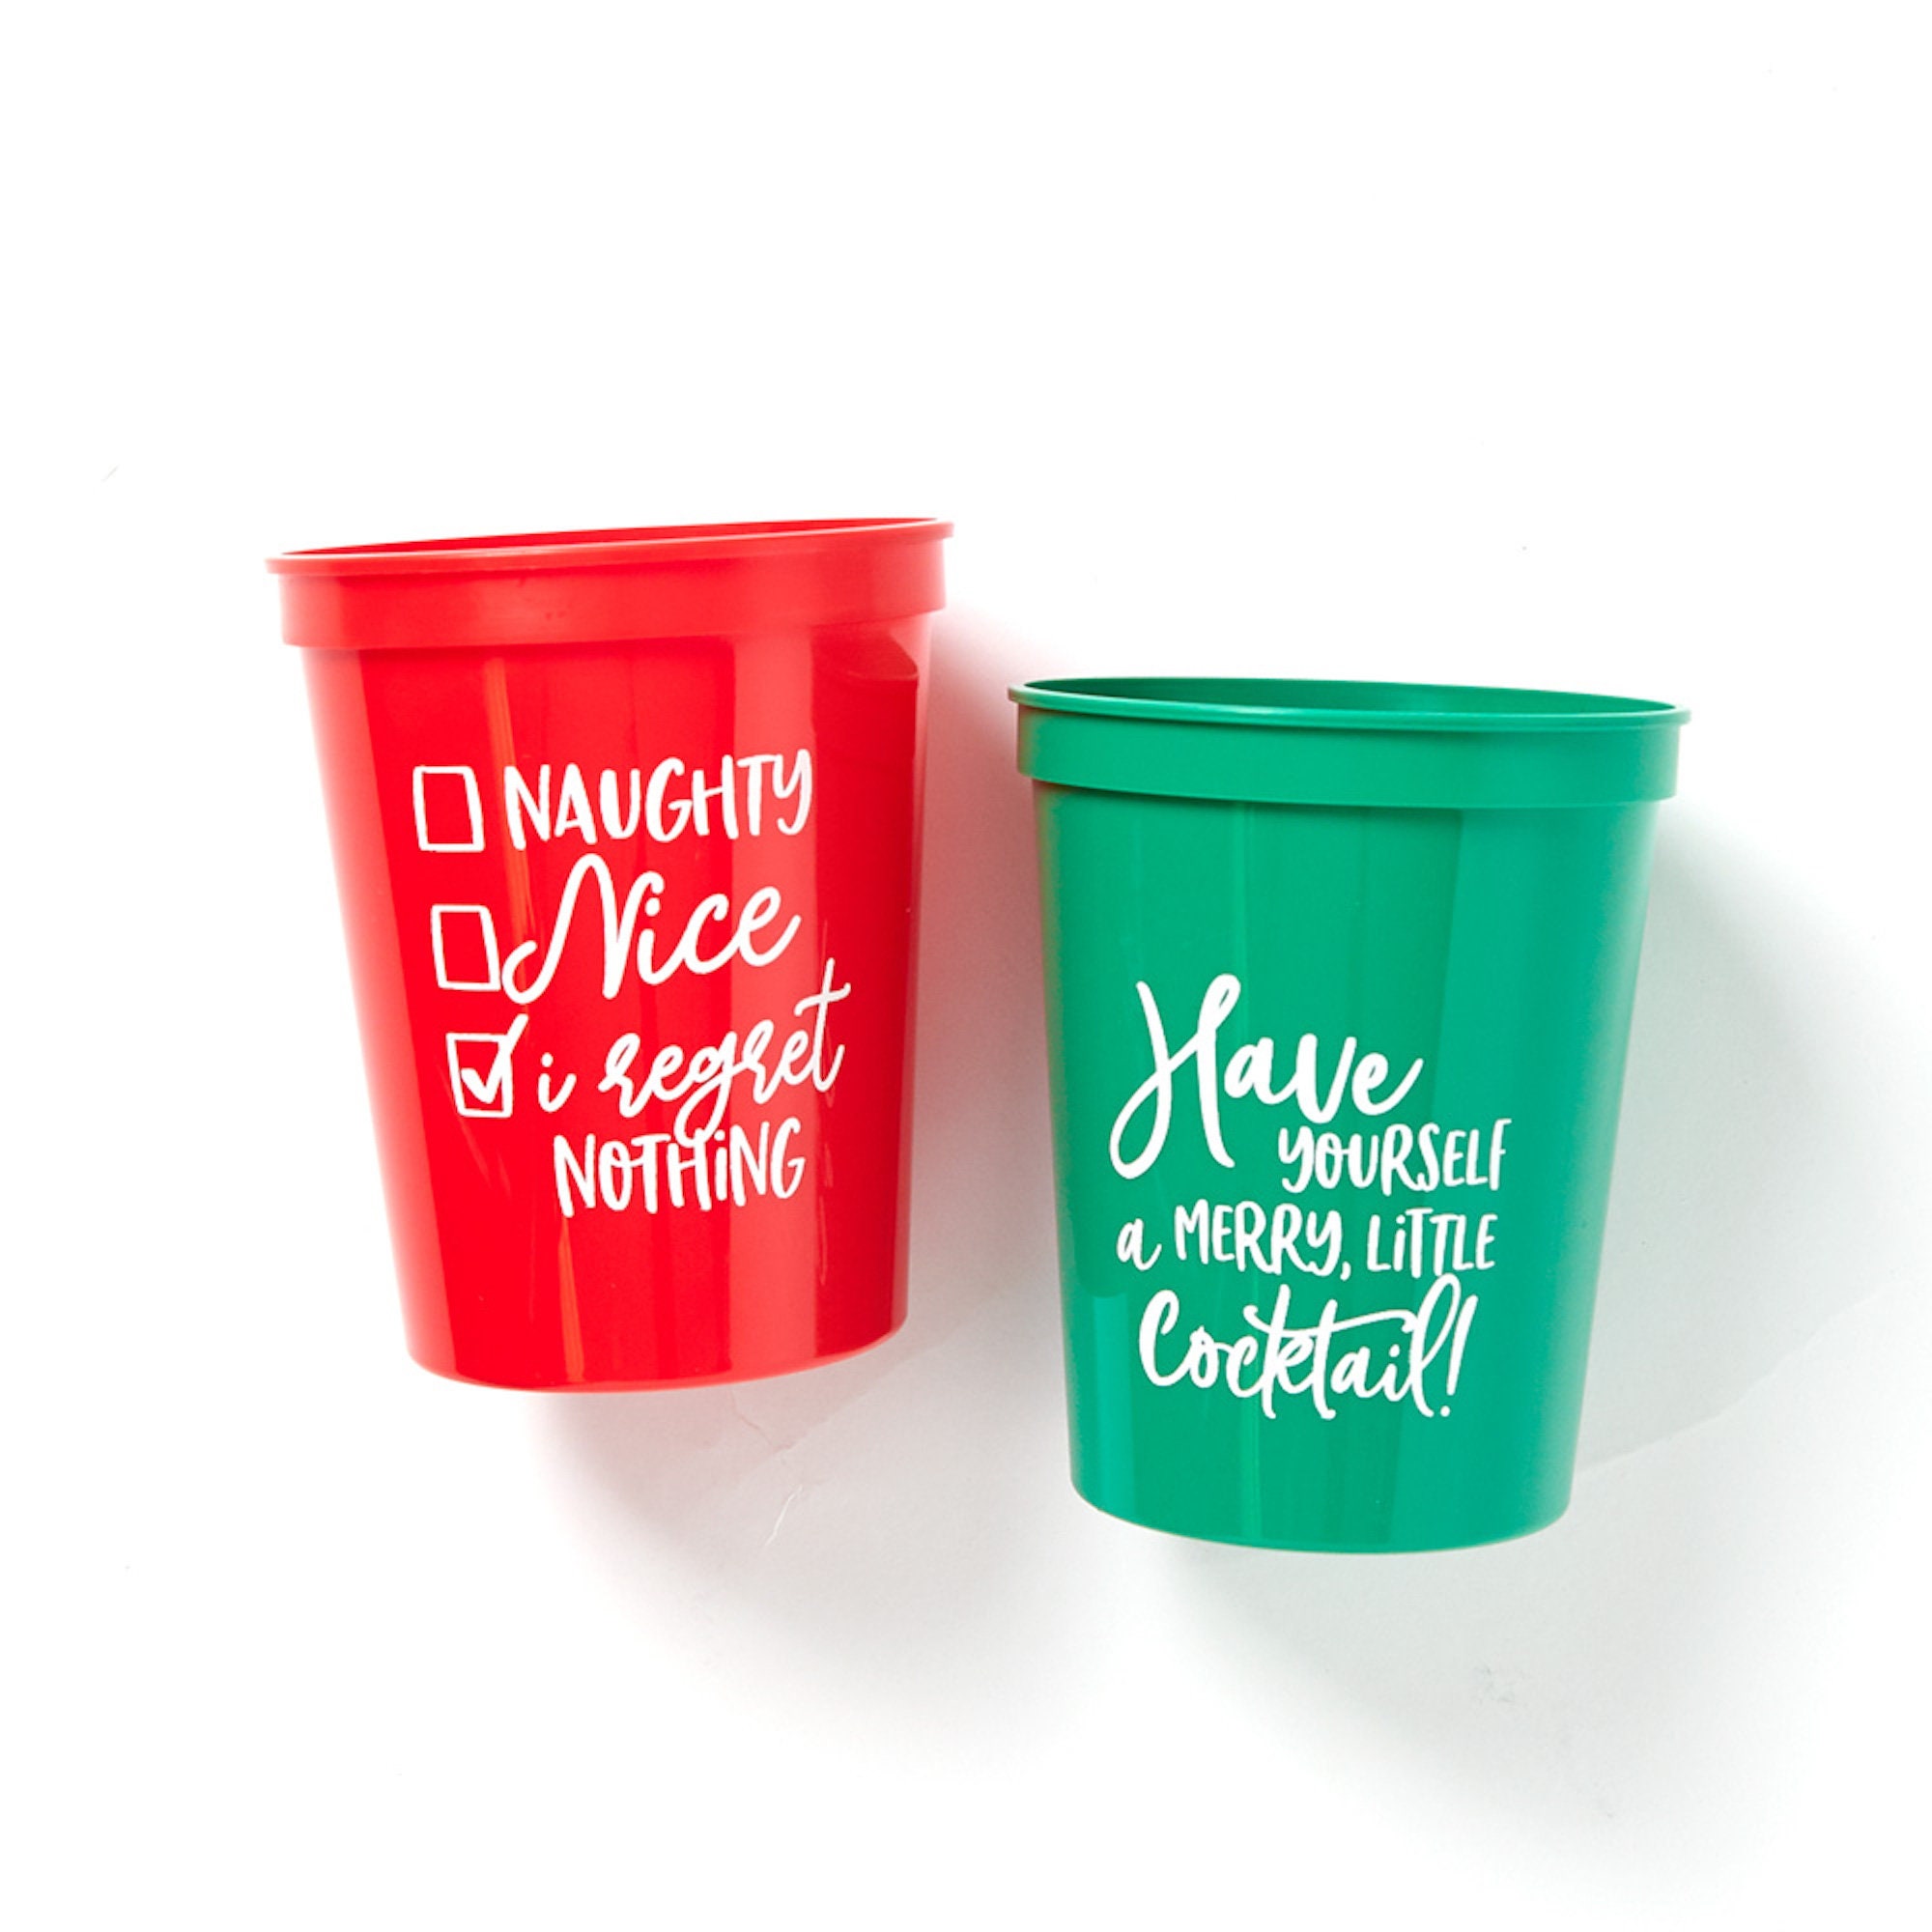  Christmas Plastic Party Cups - Set of 20 White,Red and Green  16oz Plastic Holiday Stadium Cups, 4 Festive Drinking Pun Designs, Perfect  for Christmas Party Supplies : Toys & Games